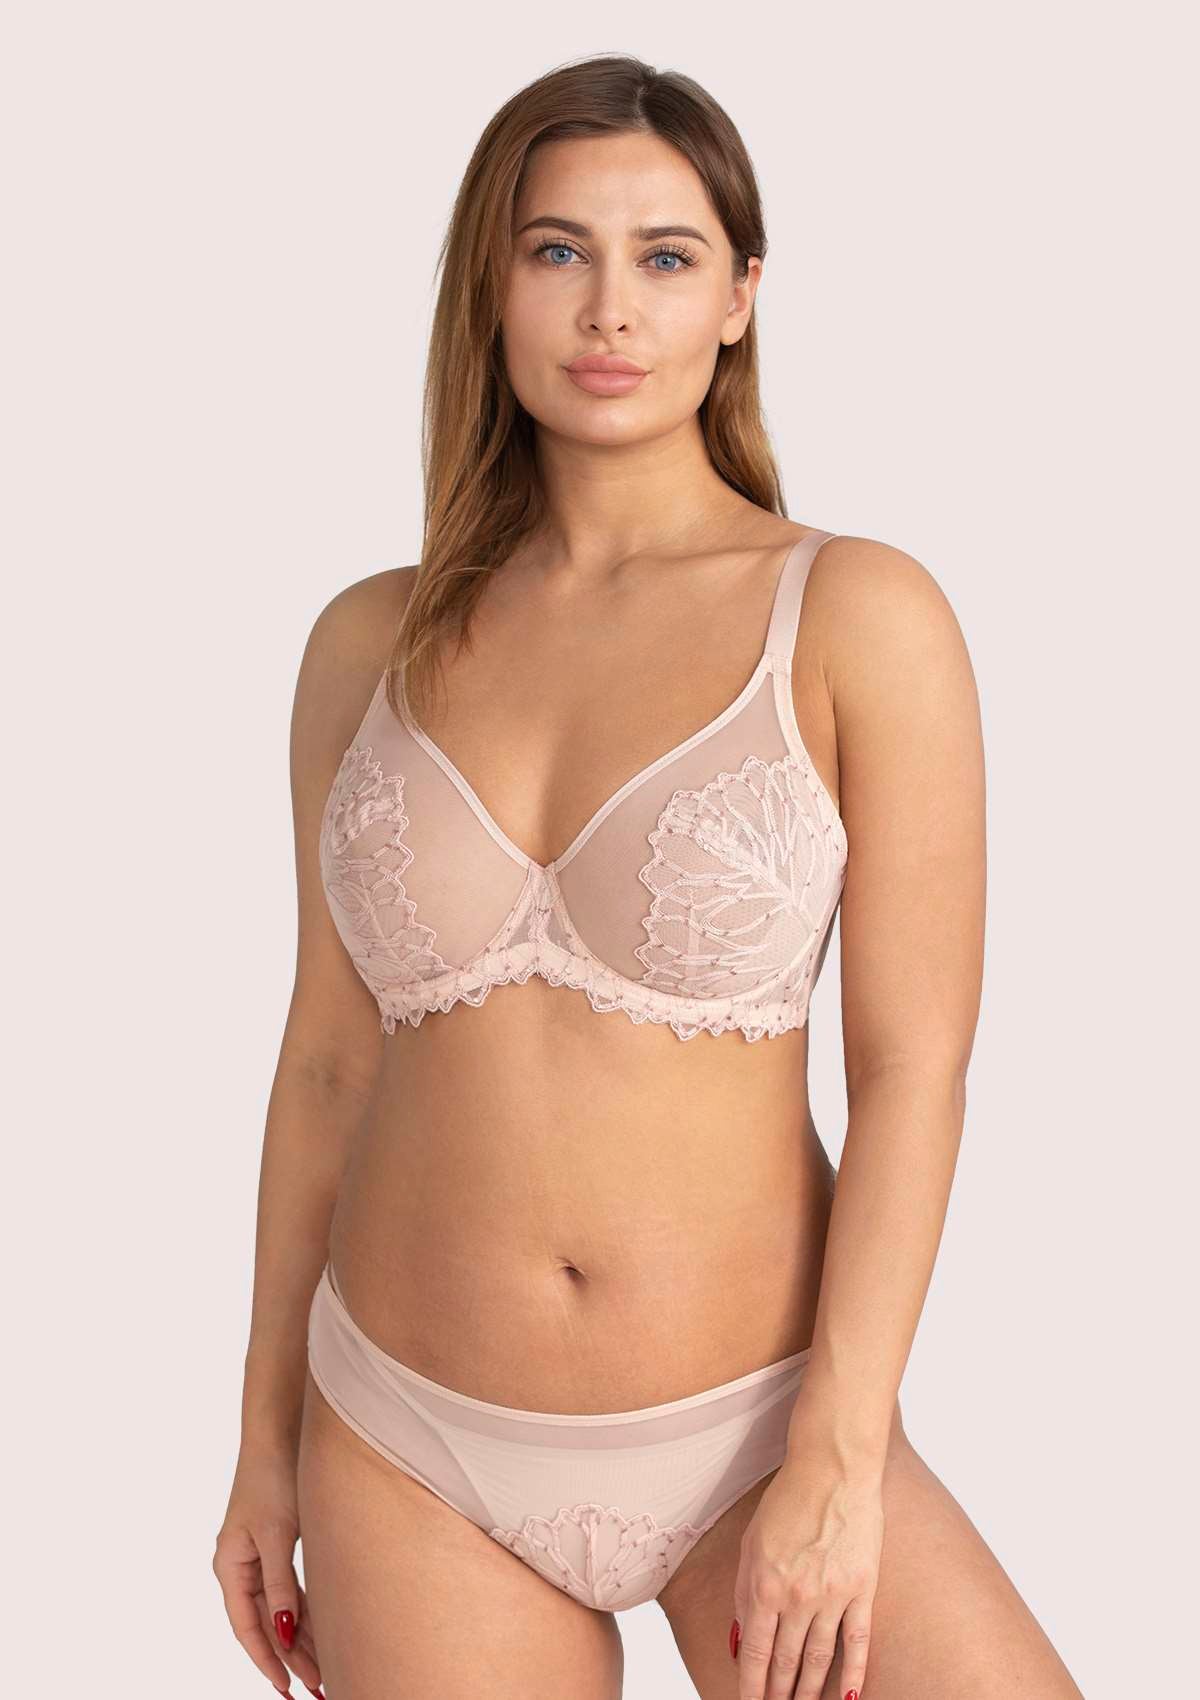 HSIA Chrysanthemum Plus Size Lace Bra: Back Support Bra For Posture - Light Pink / 34 / DDD/F